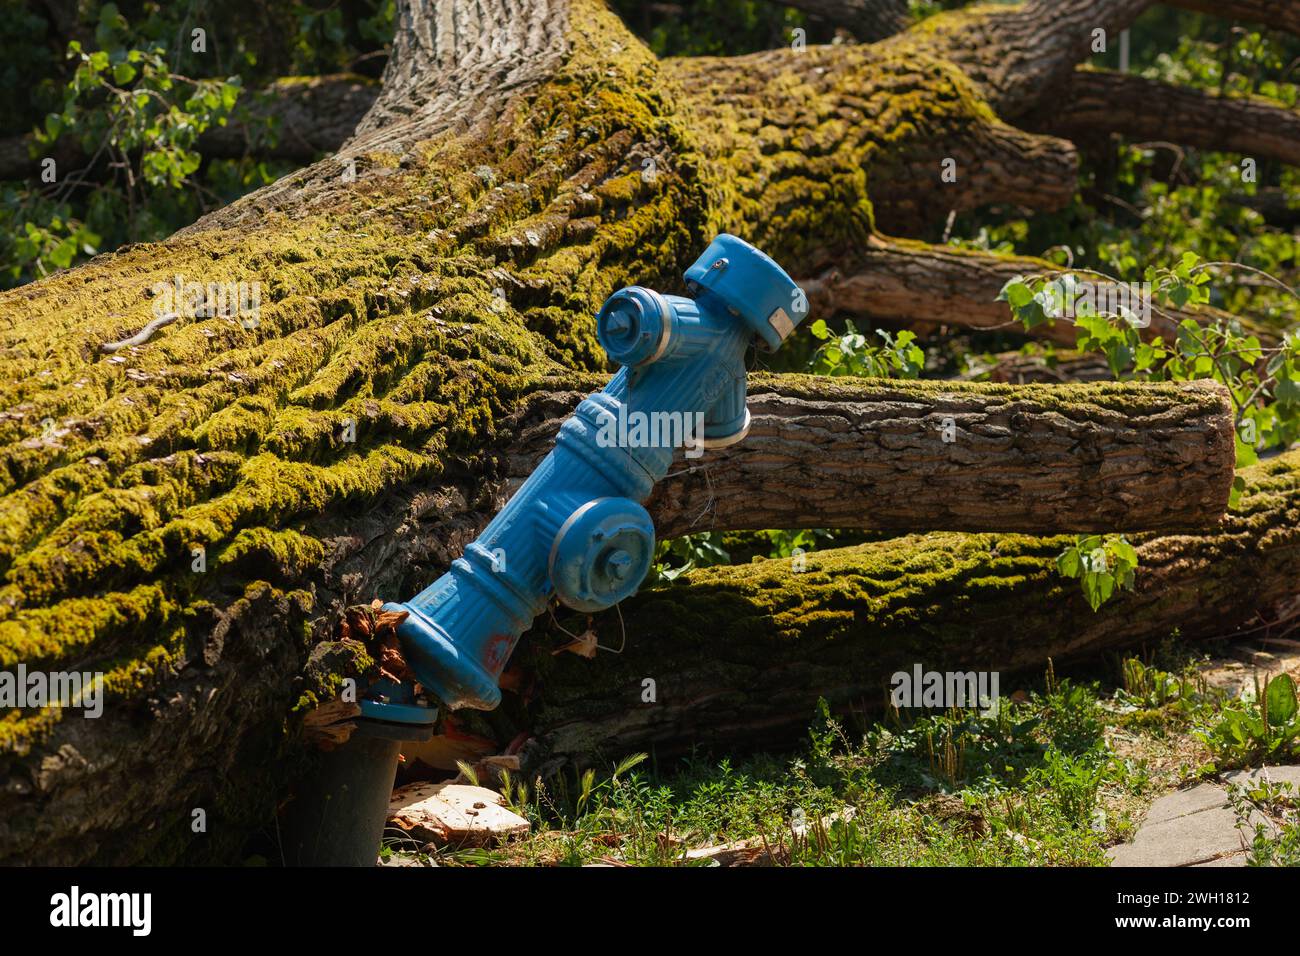 Large tree fell on blue fire hydrant and broke it, storm aftermath Stock Photo